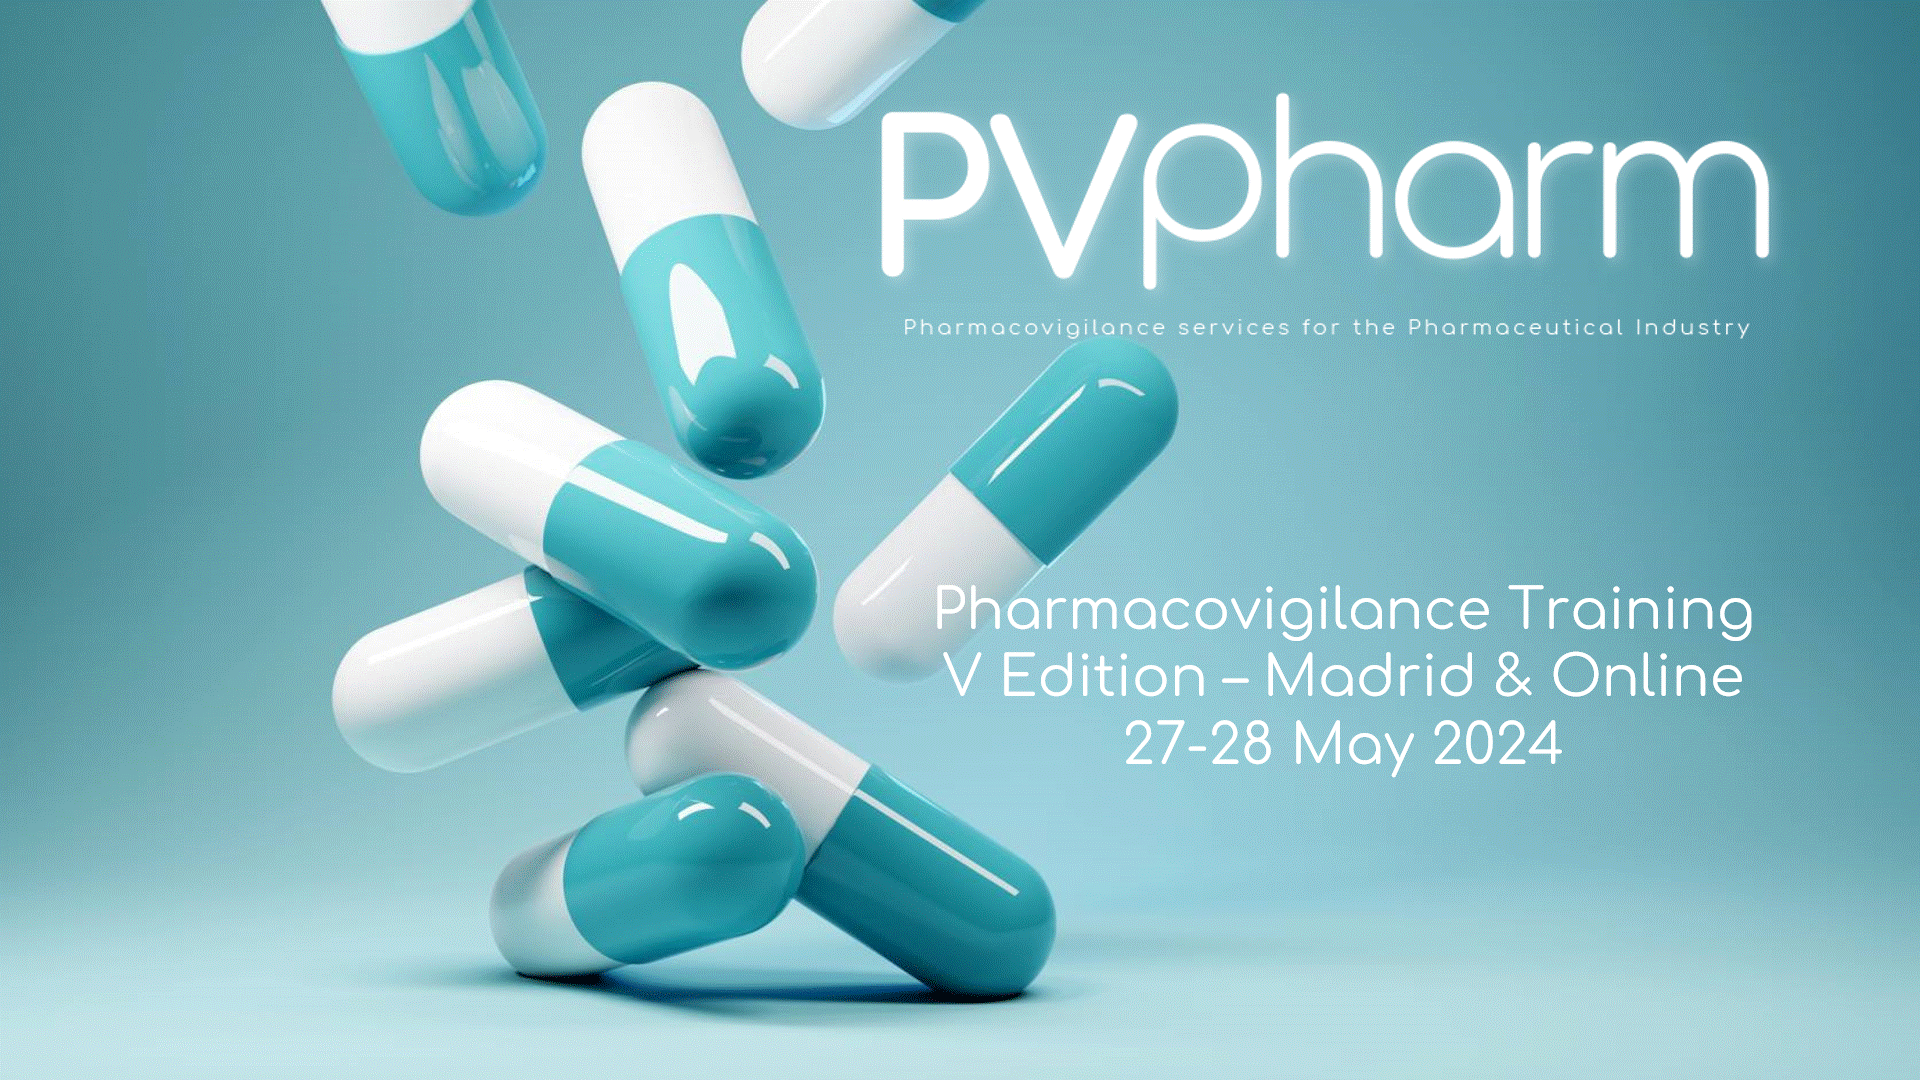 You are currently viewing Brochure available! Pharmacovigilance training V edition, Madrid & Online 27-28 May 2024